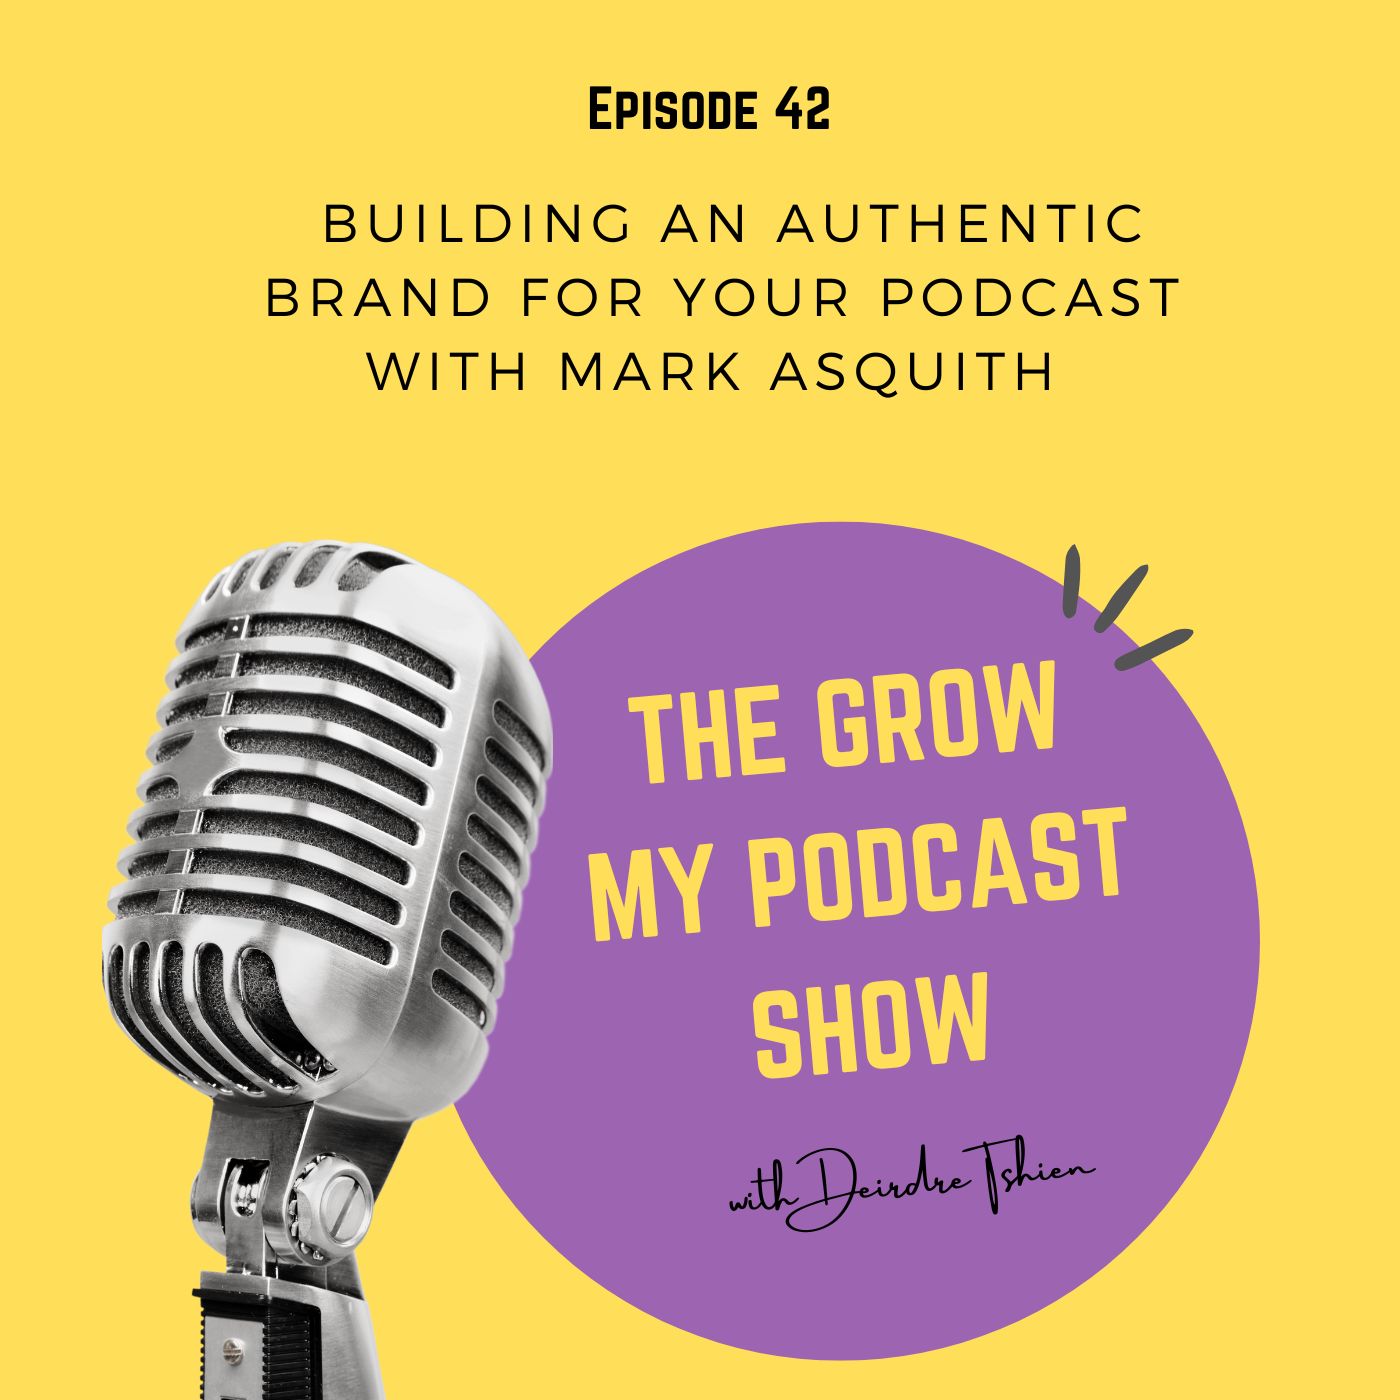 42. Building an Authentic Brand for your podcast with Mark Asquith